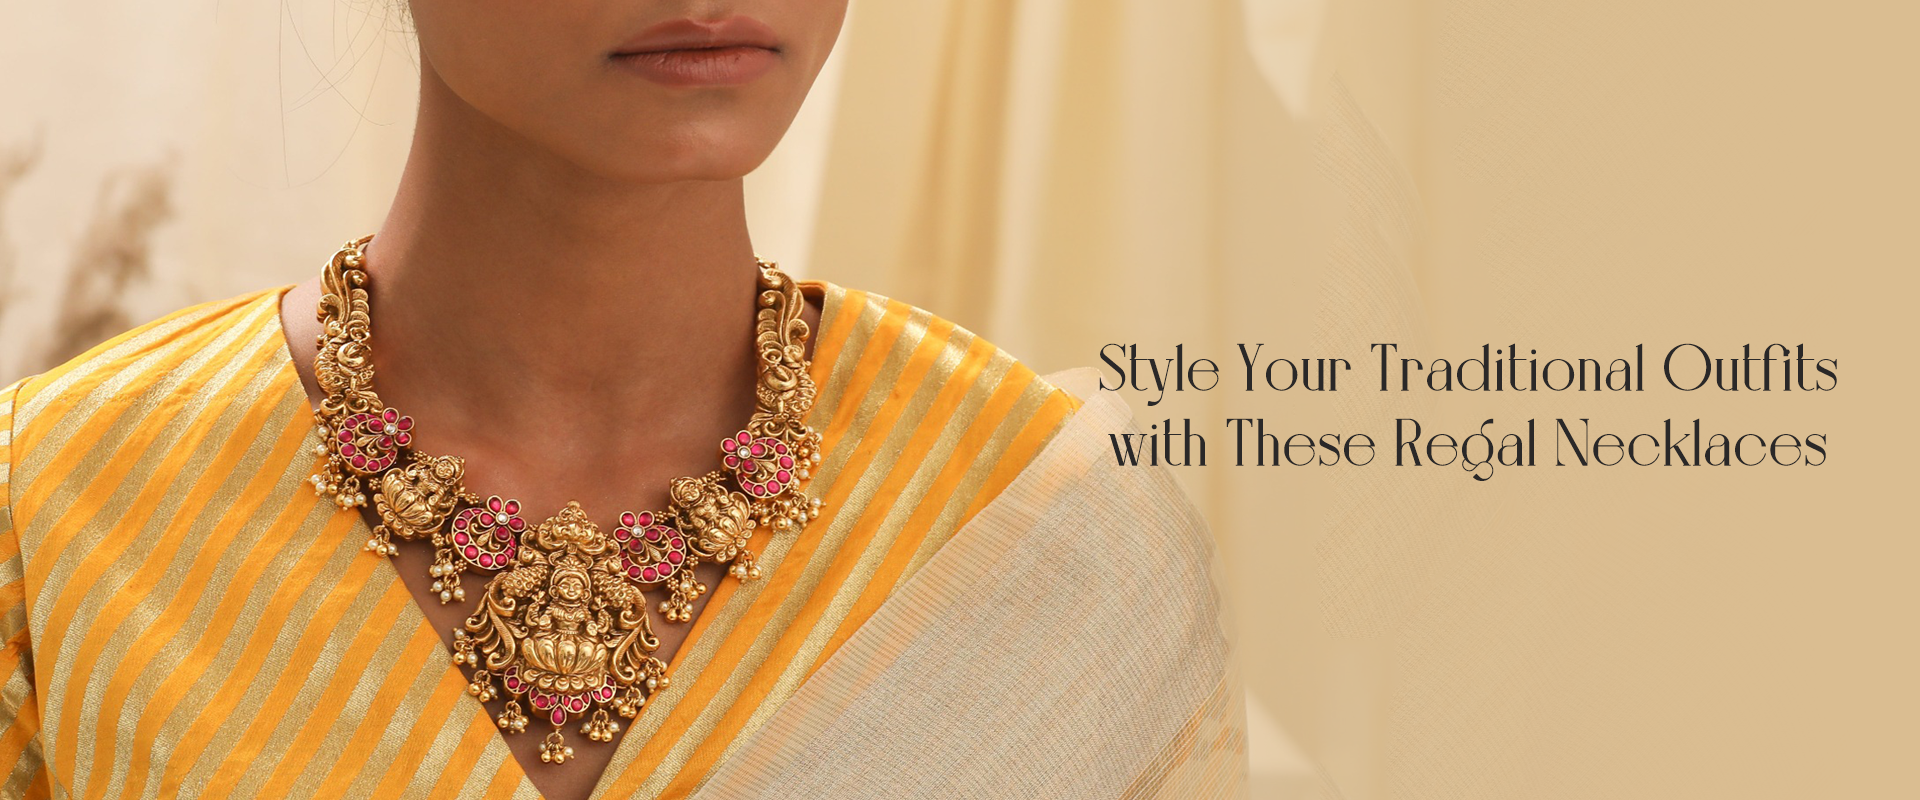 Style Your Traditional Outfits with These Regal Necklaces